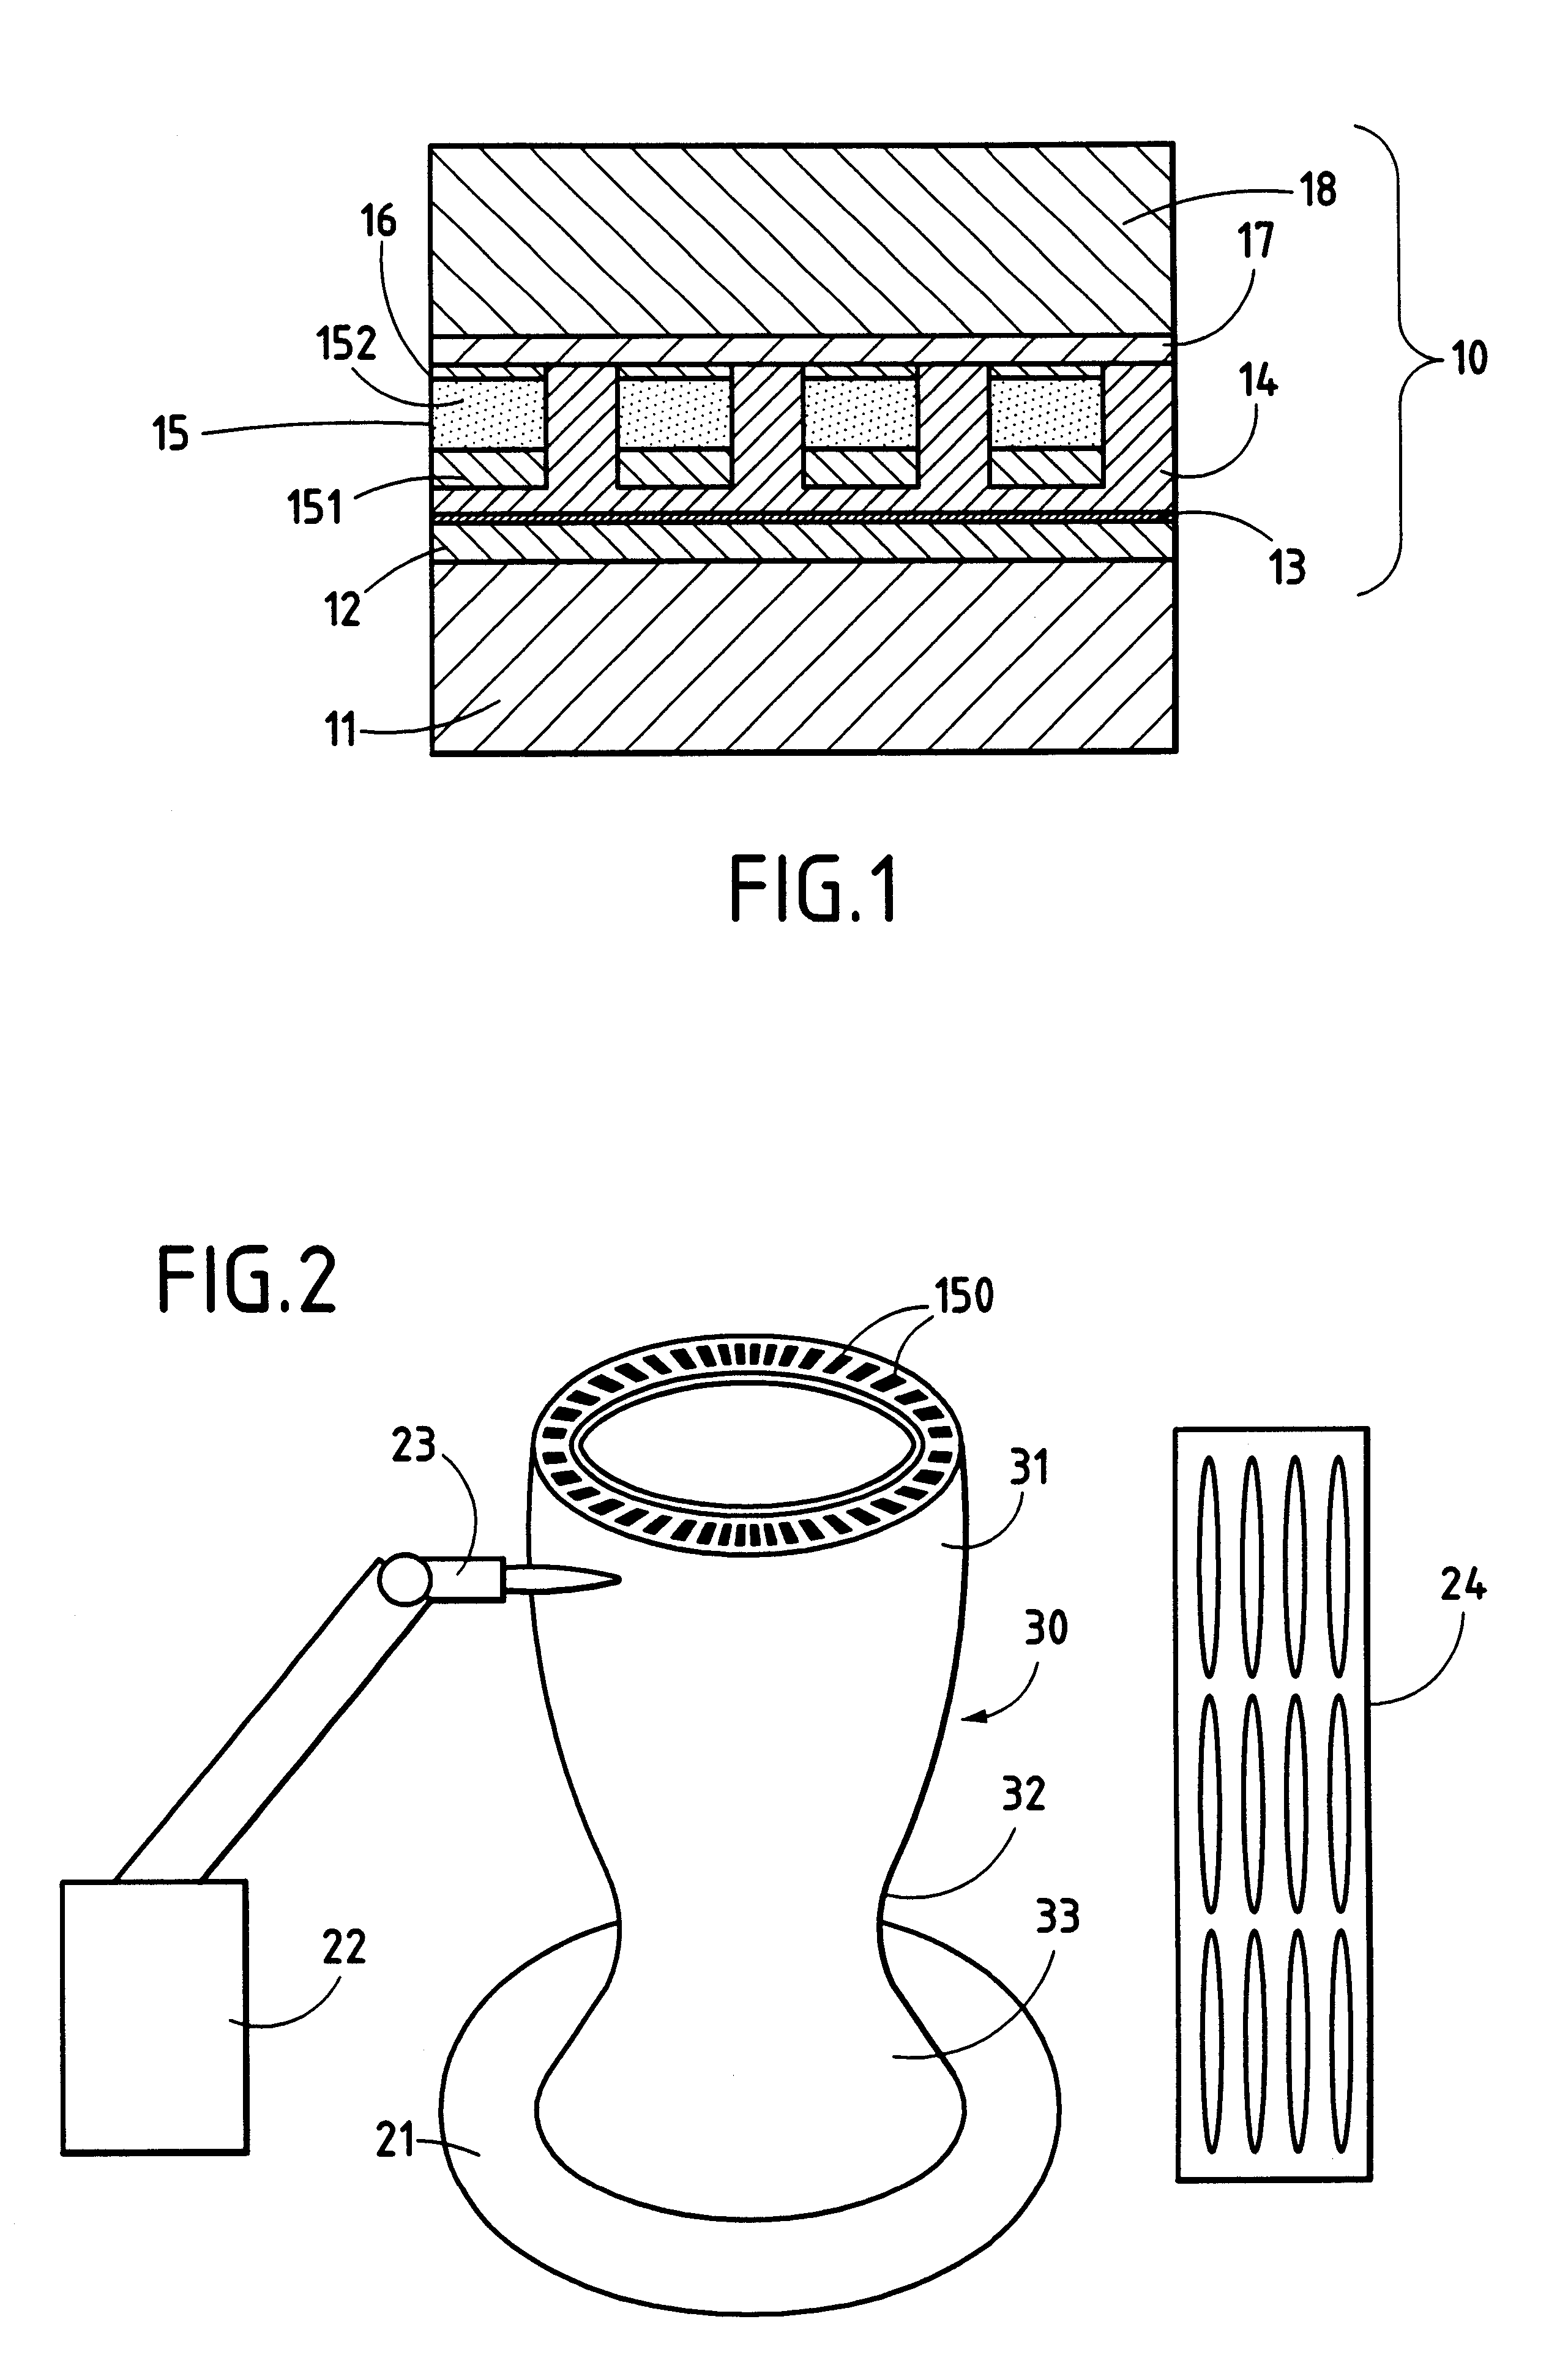 Method of manufacturing a high heat flux regenerative circuit, in particular for the combustion chamber of a rocket engine